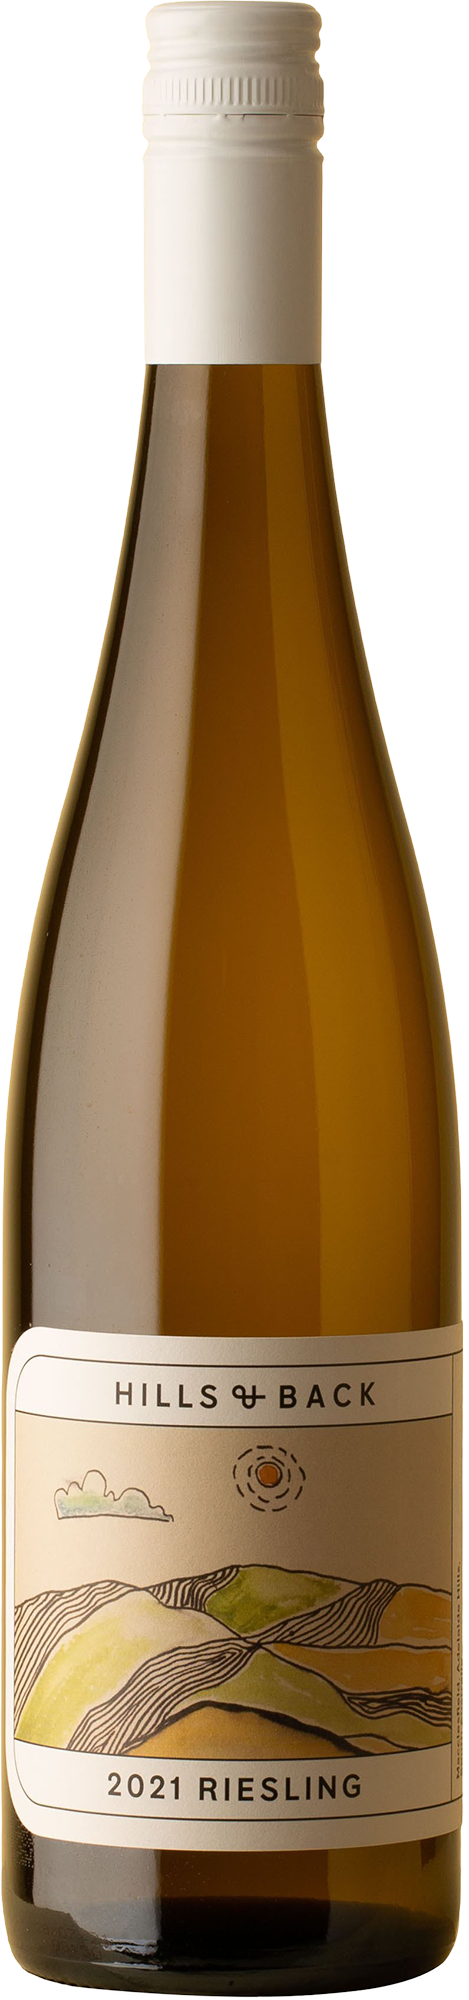 Hills & Back - Riesling 2021 White Wine